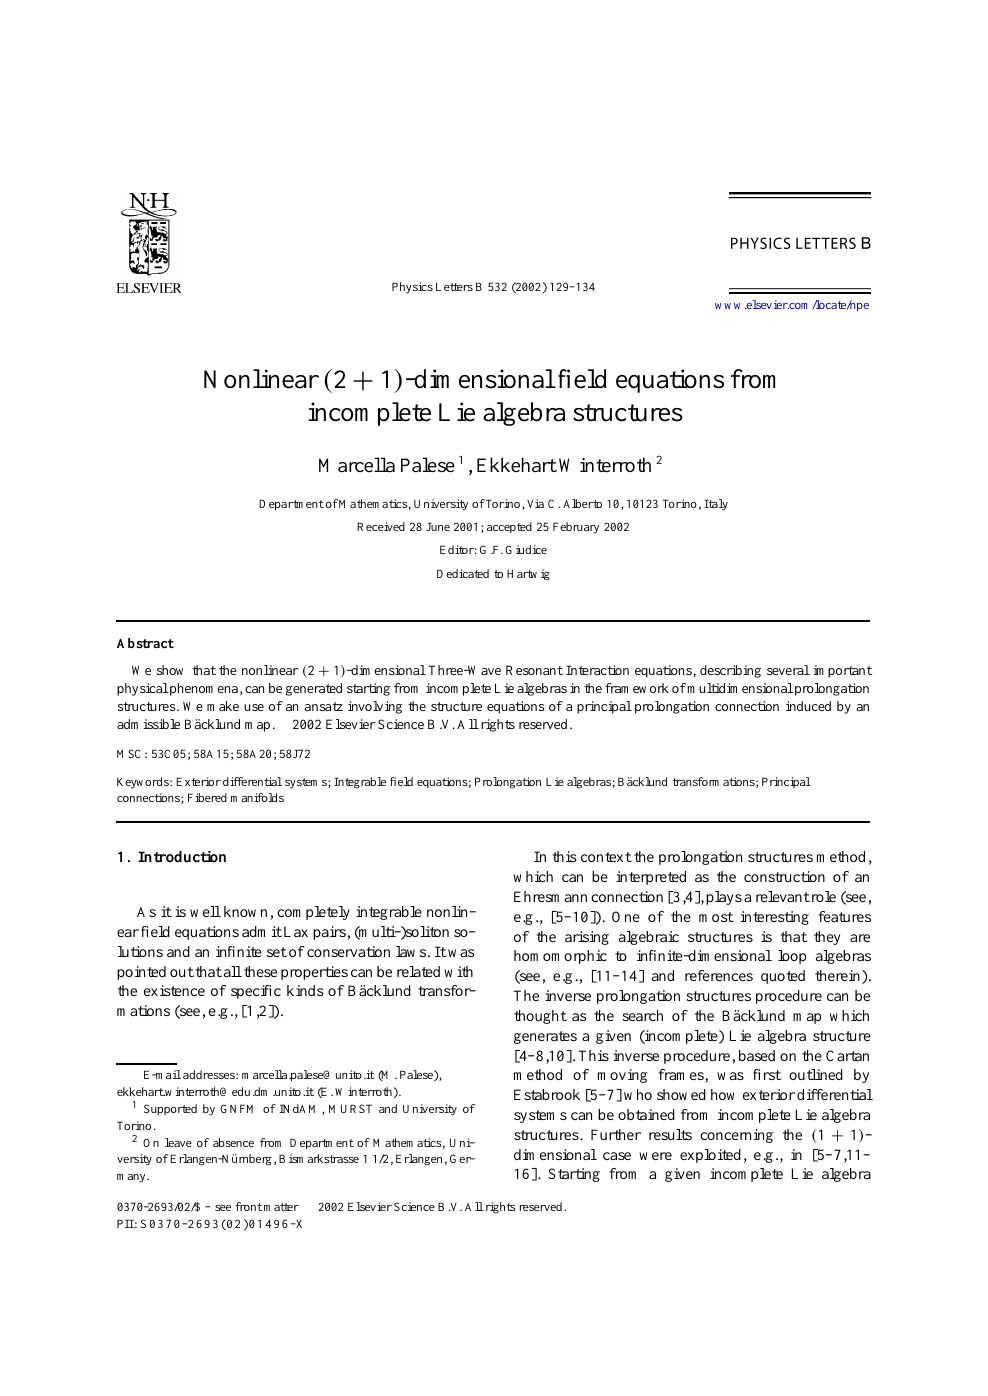 Nonlinear 2 1 Dimensional Field Equations From Incomplete Lie Algebra Structures Topic Of Research Paper In Physical Sciences Download Scholarly Article Pdf And Read For Free On Cyberleninka Open Science Hub